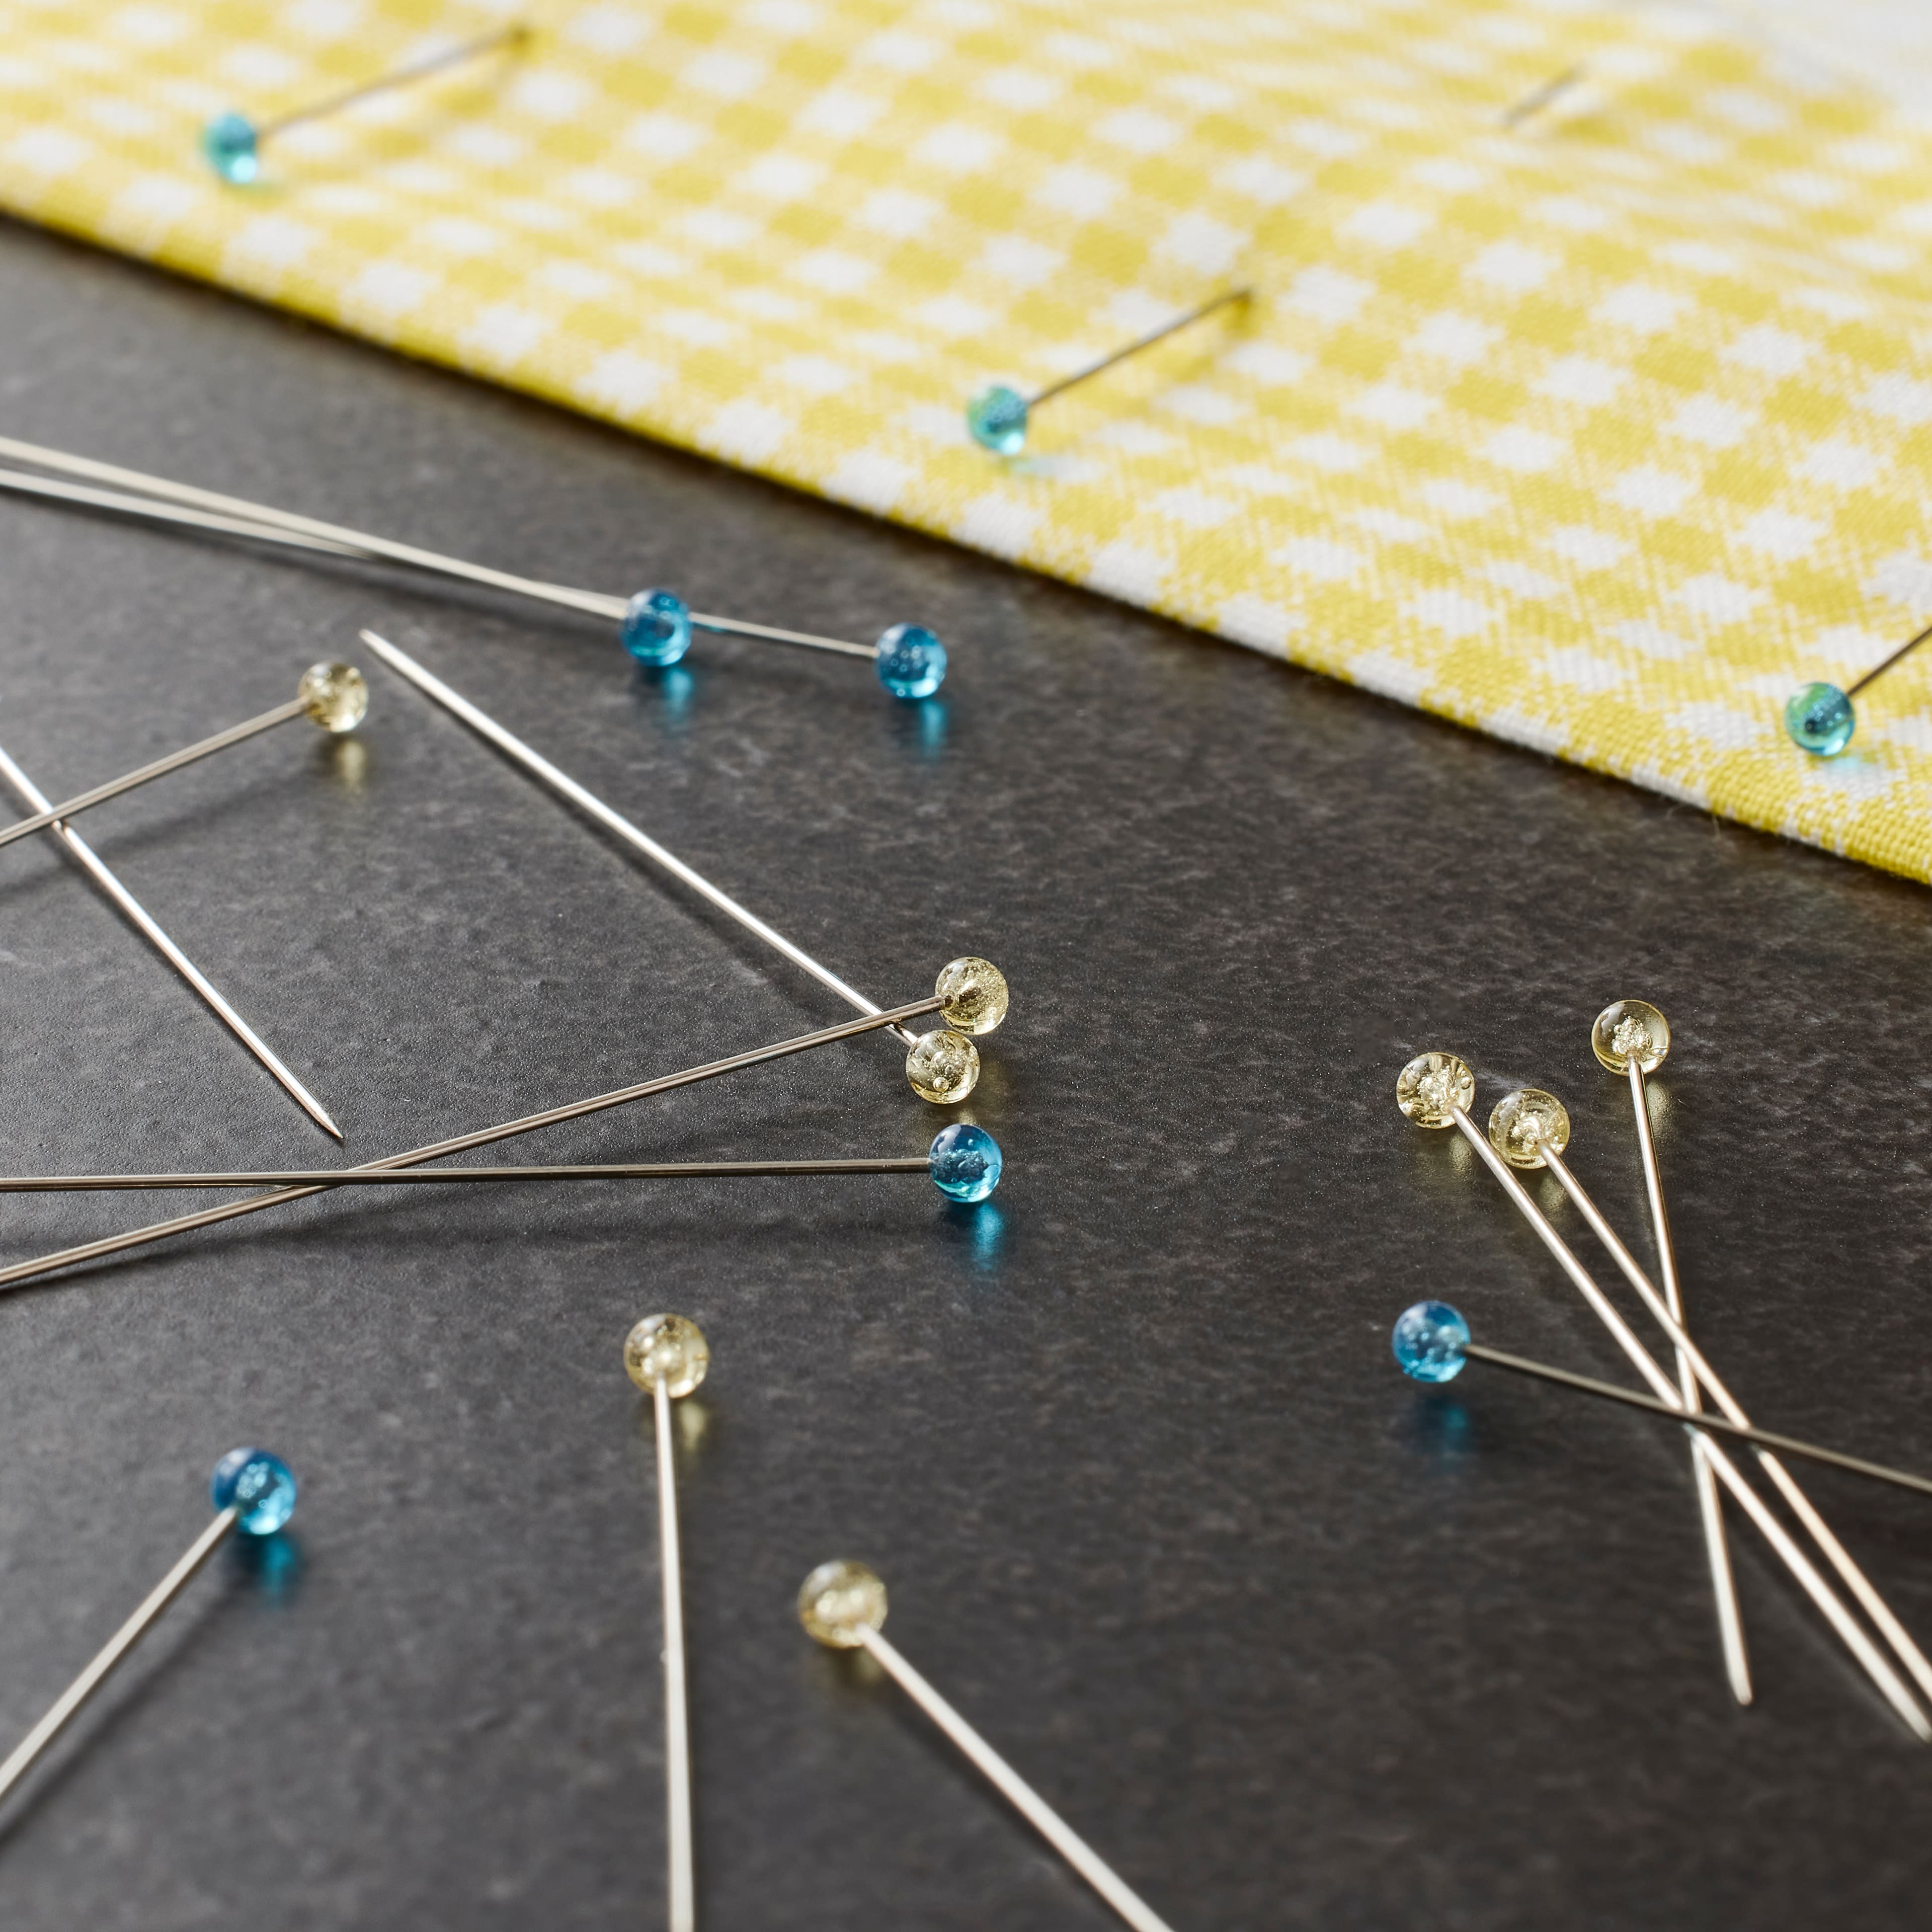 Different Types of Sewing Pins for Beginners